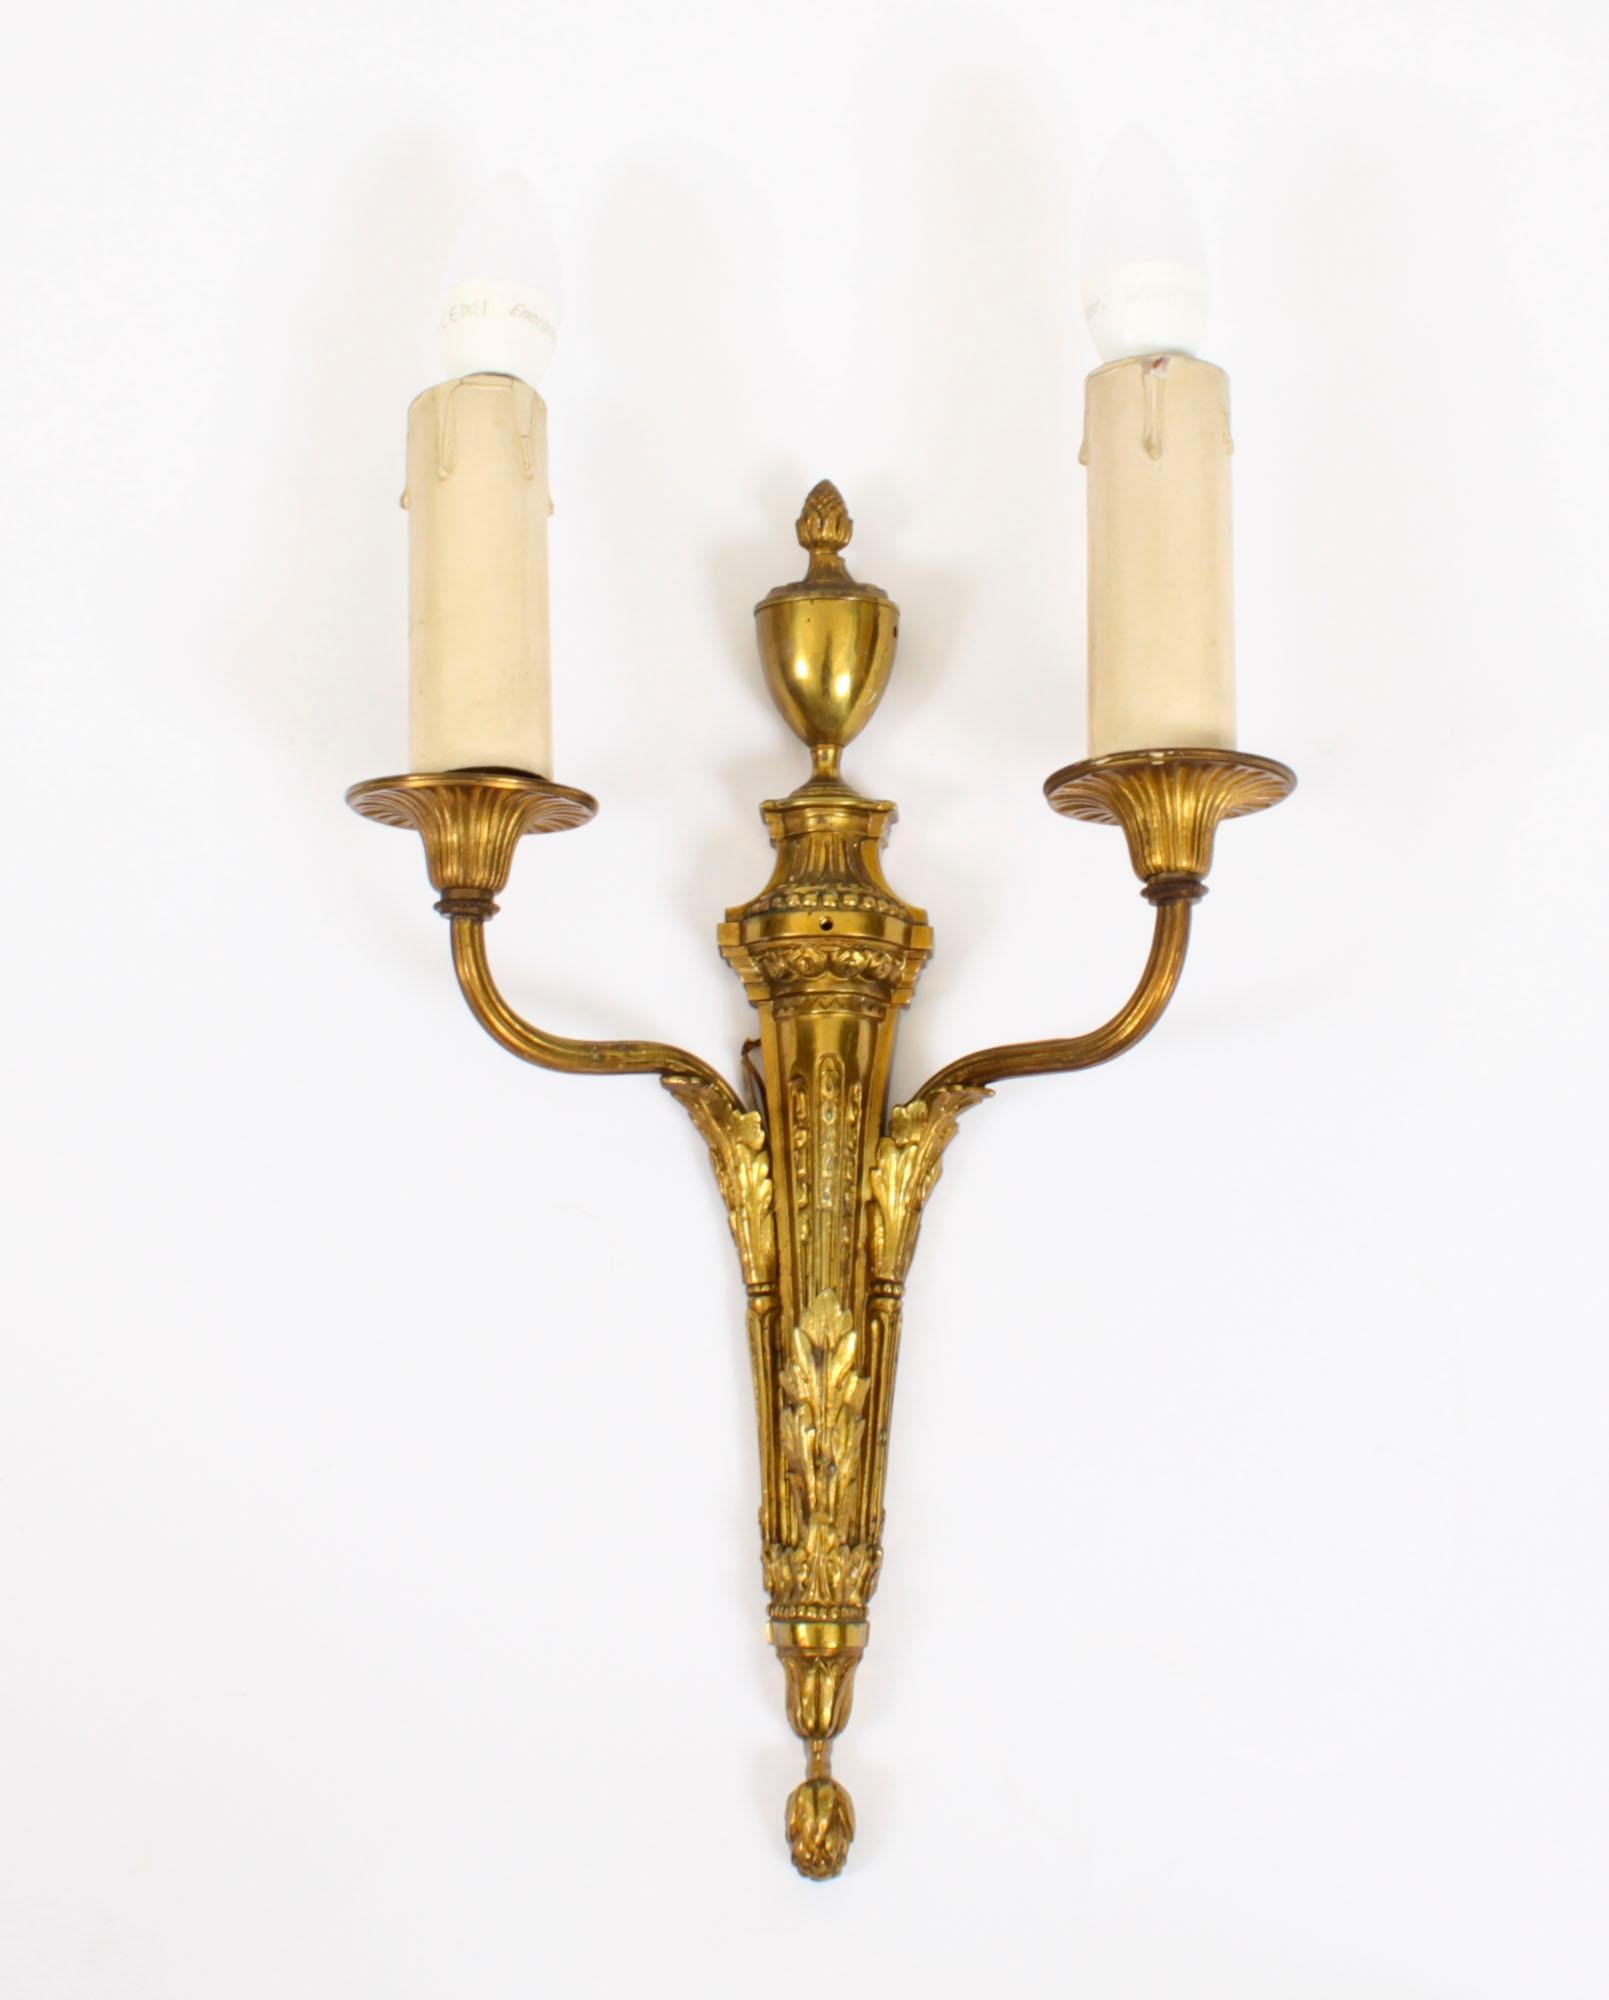 This is a very fine set of four good sized Adam revival ormolu twin branch wall lights dating from the mid 19th Century.
 
The lights feature classical Regency elements with anthemion and classical flaming urn, with flame and scrolling drapery cast